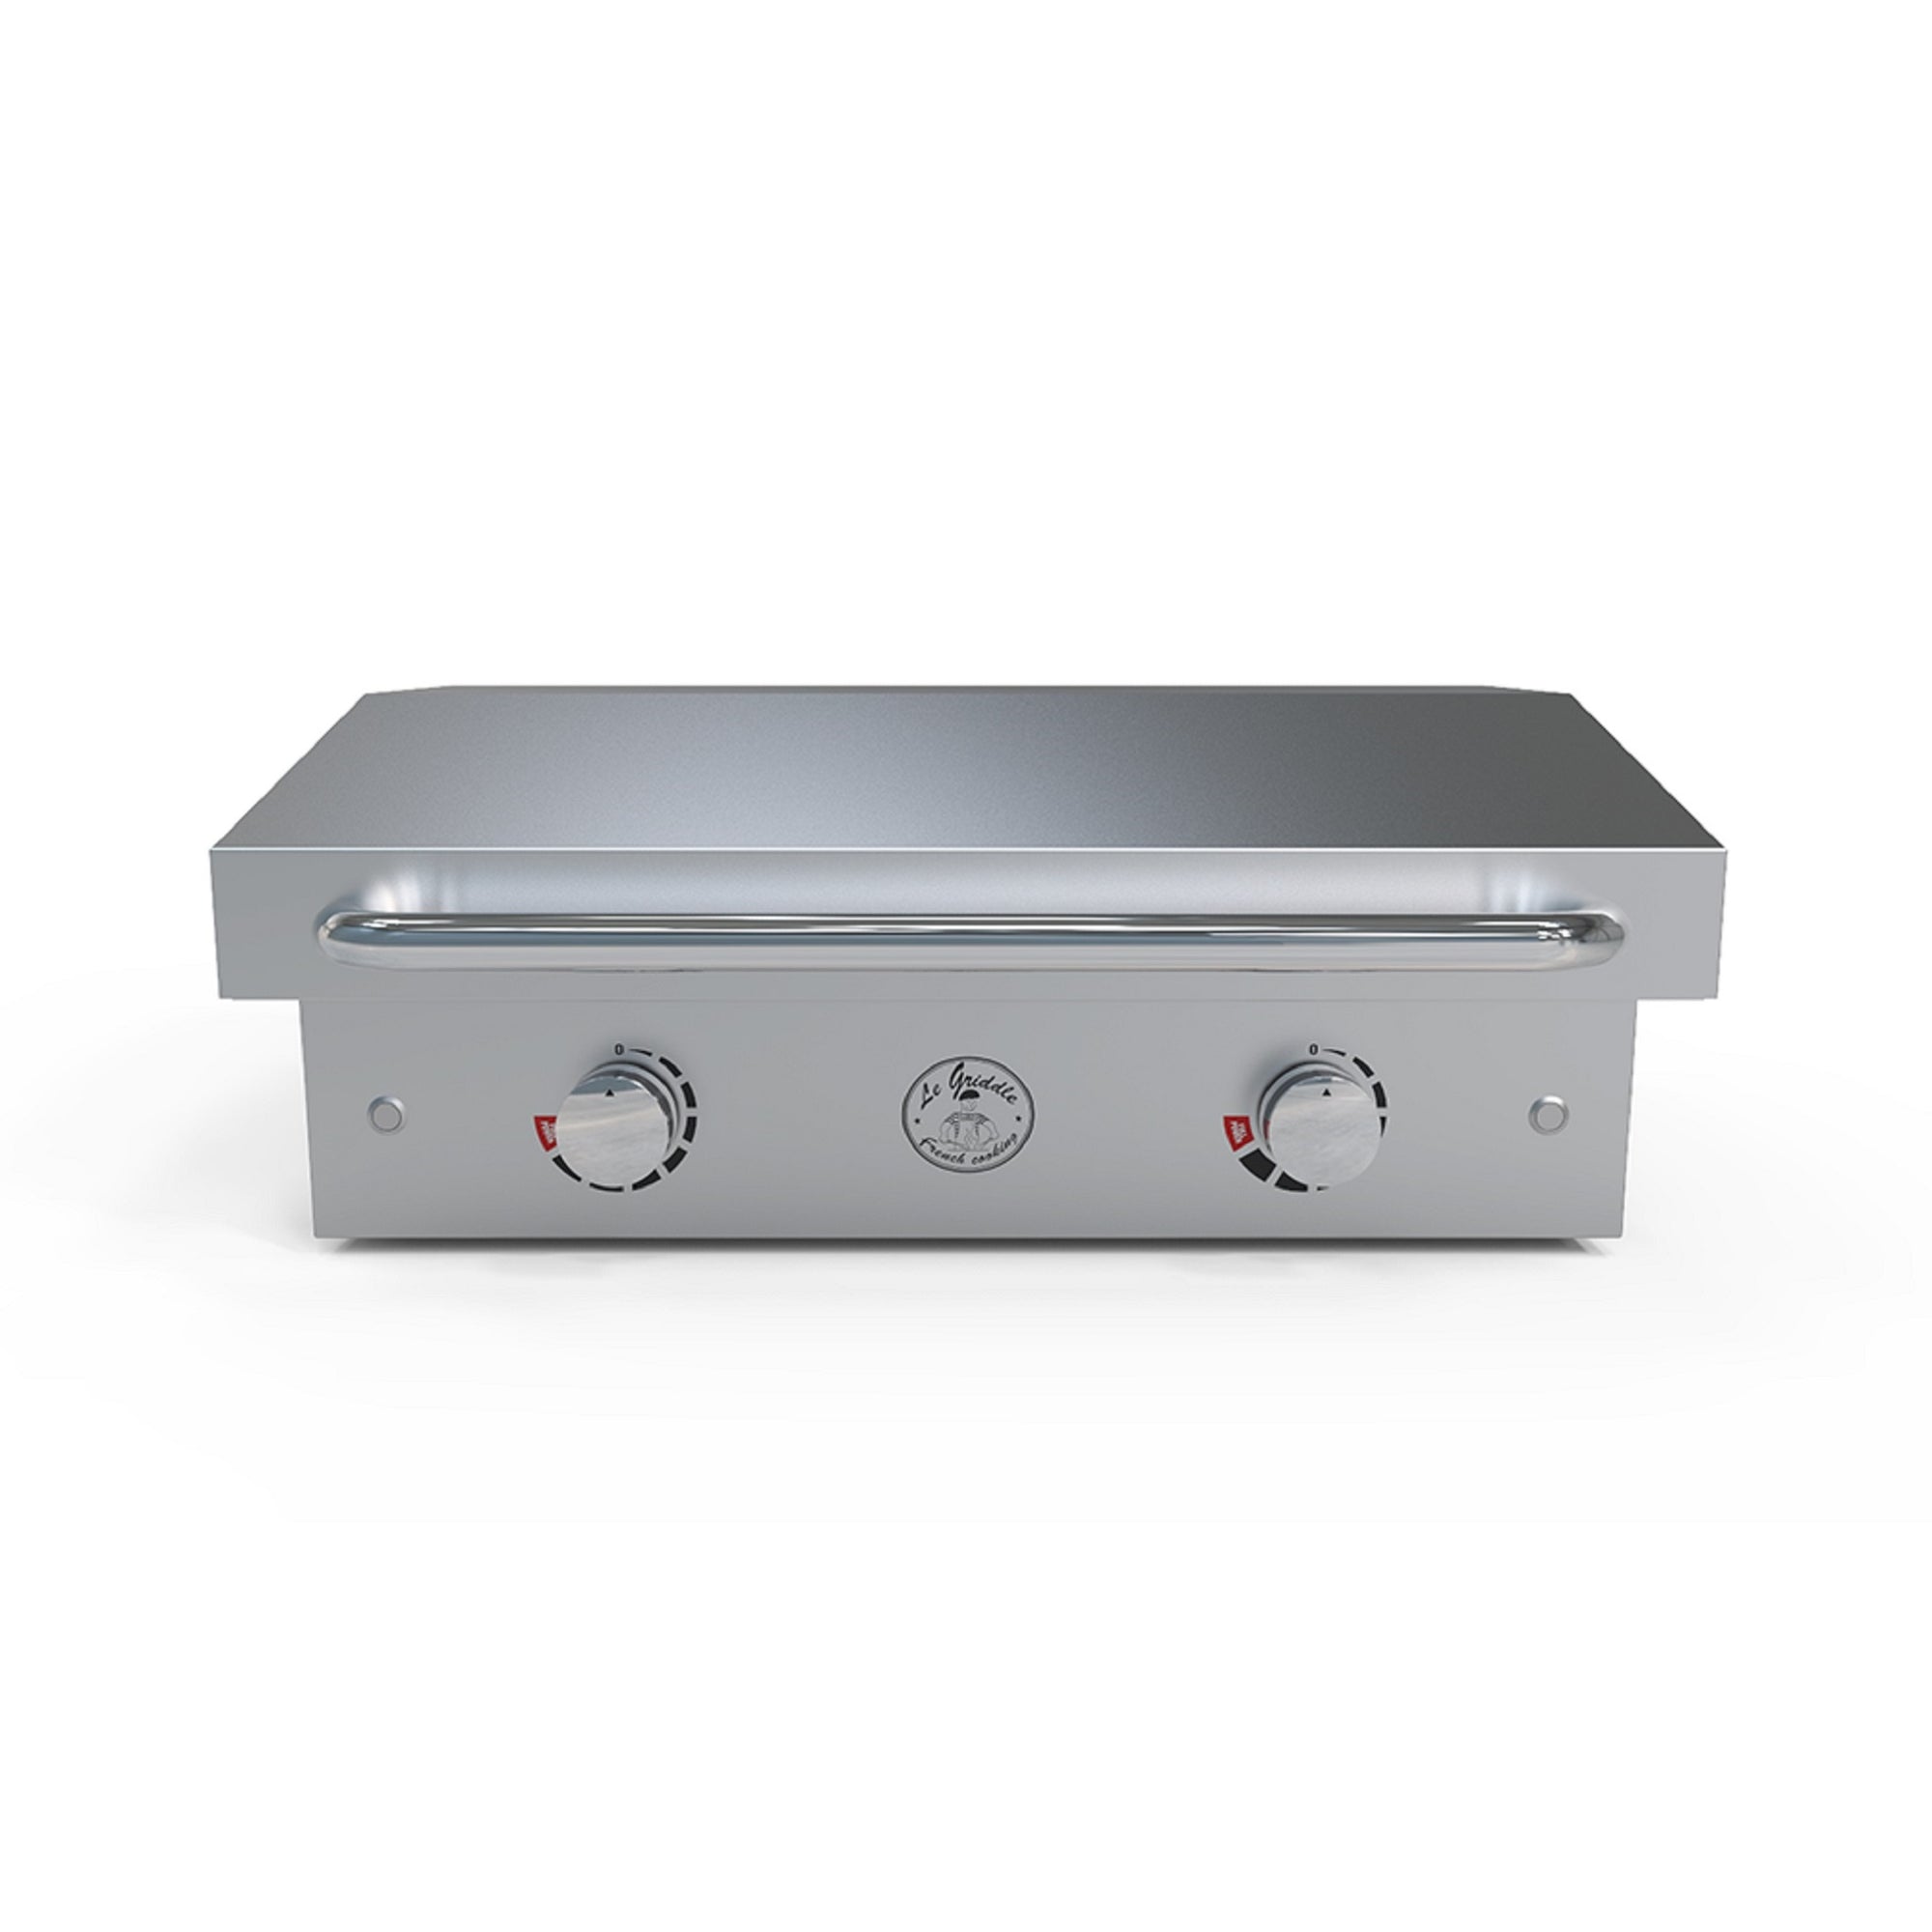 Le Griddle-2 burner electric - 304 Stainless Steel Construction in a white background front view